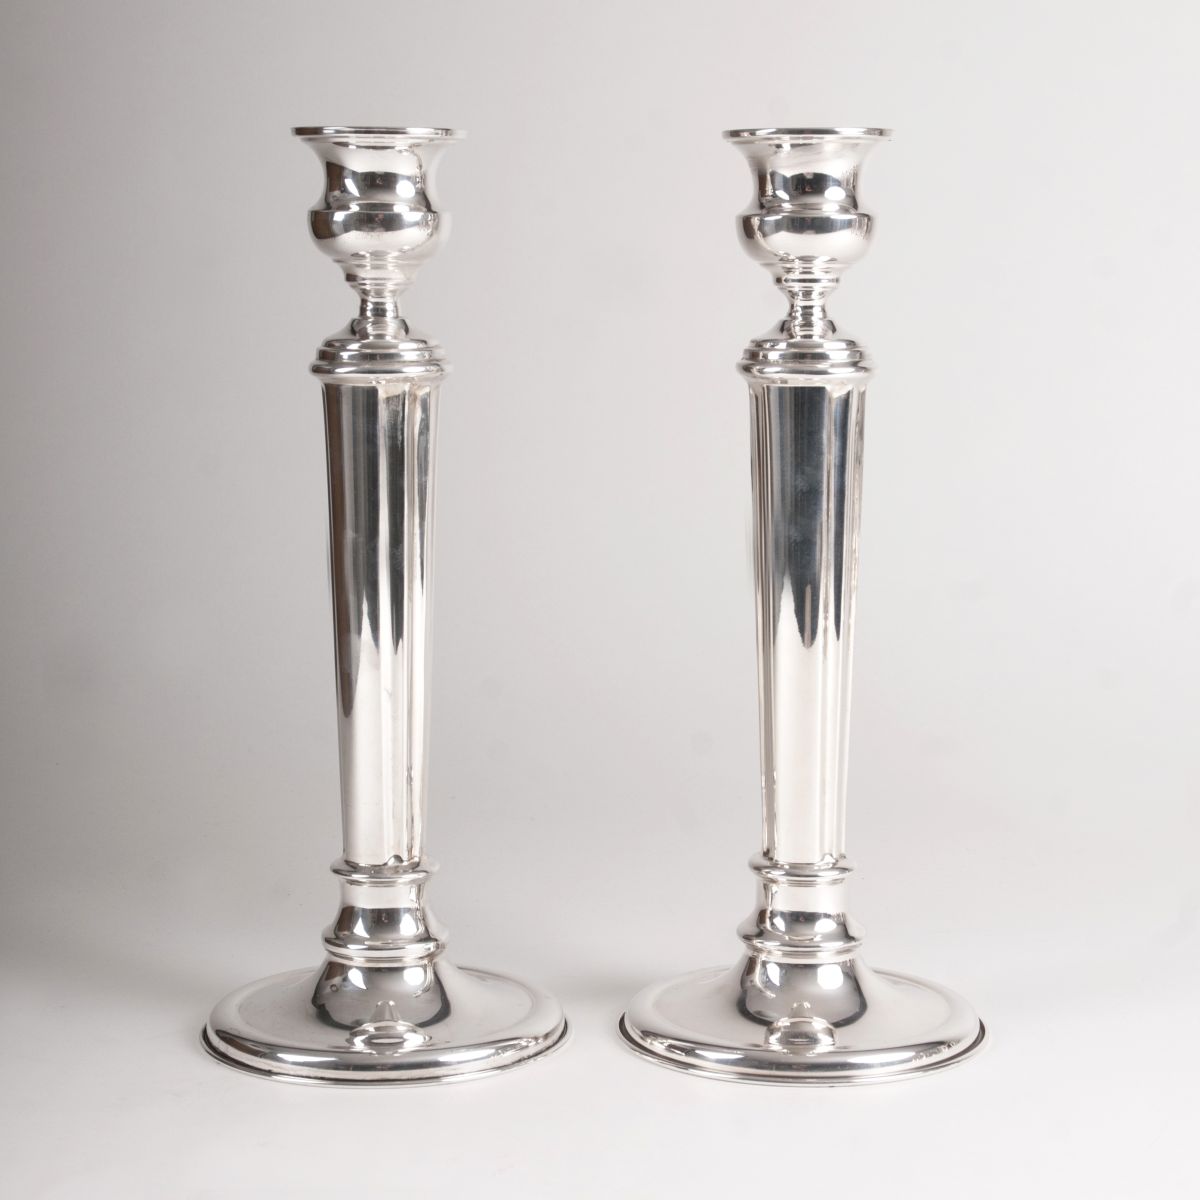 A pair of large table candle holders